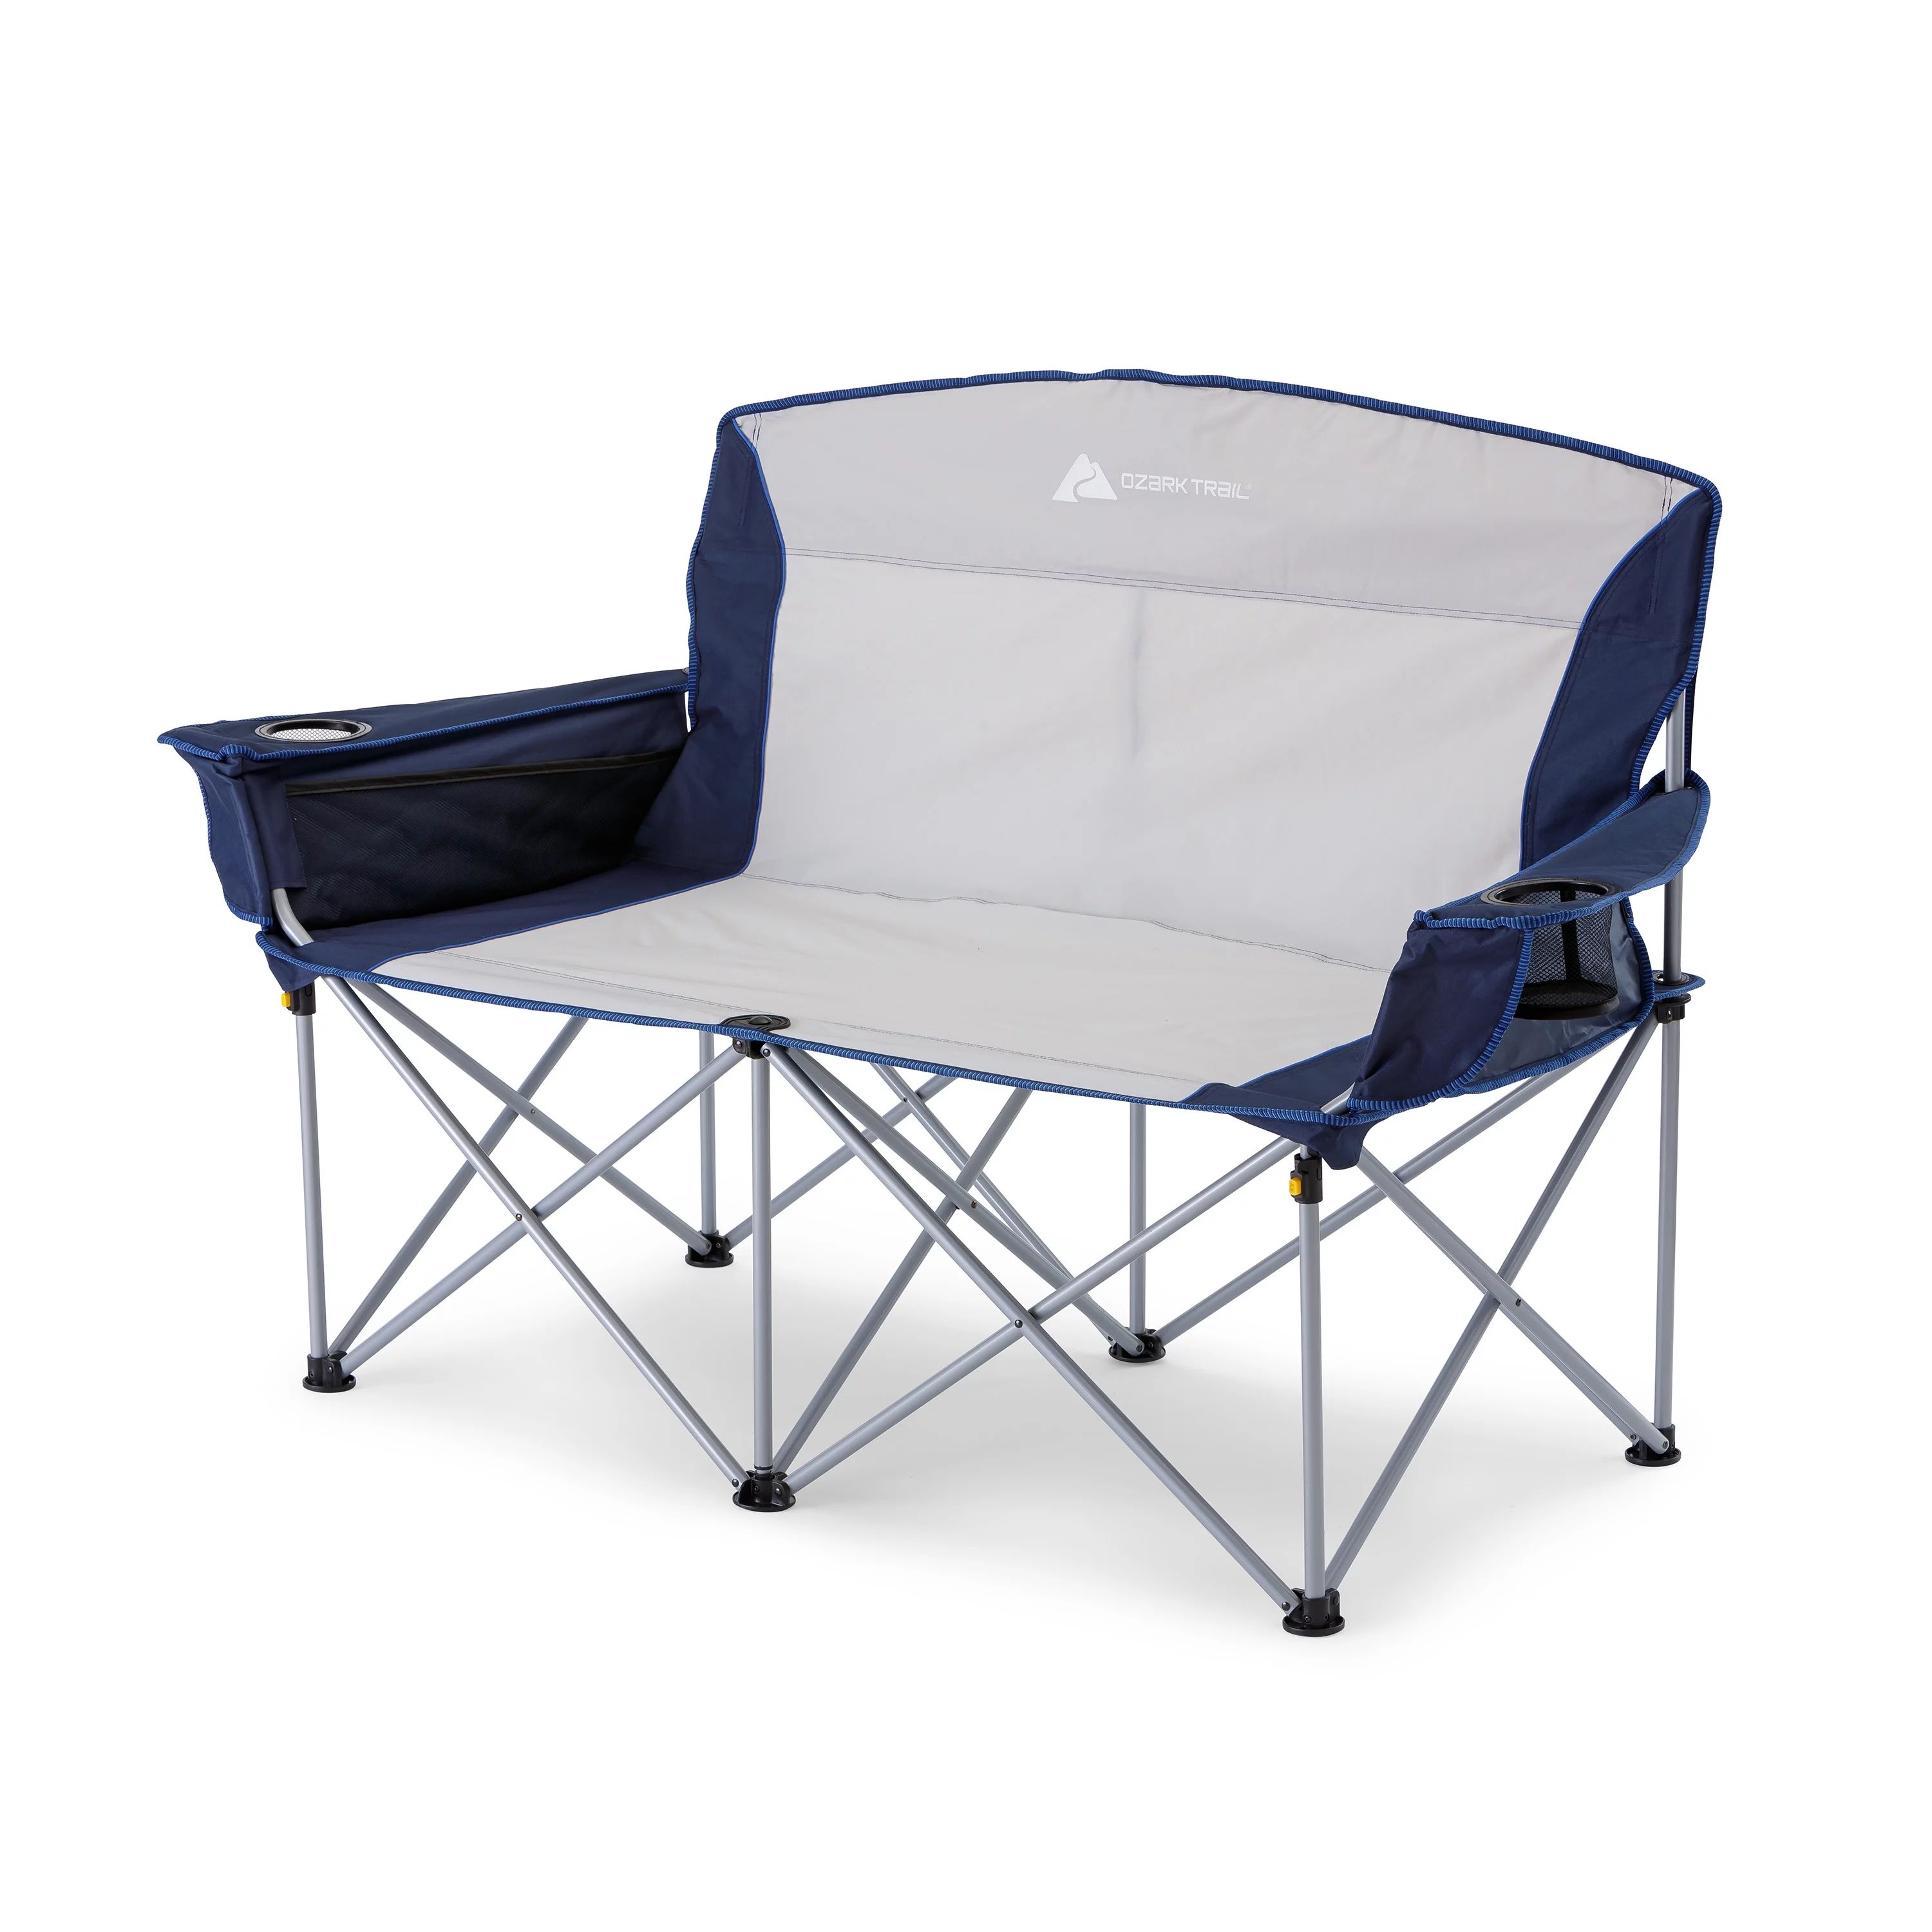 Ozark Trail 2 Person Loveseat Camping Chair, Blue and Gray, Adult | Walmart (US)